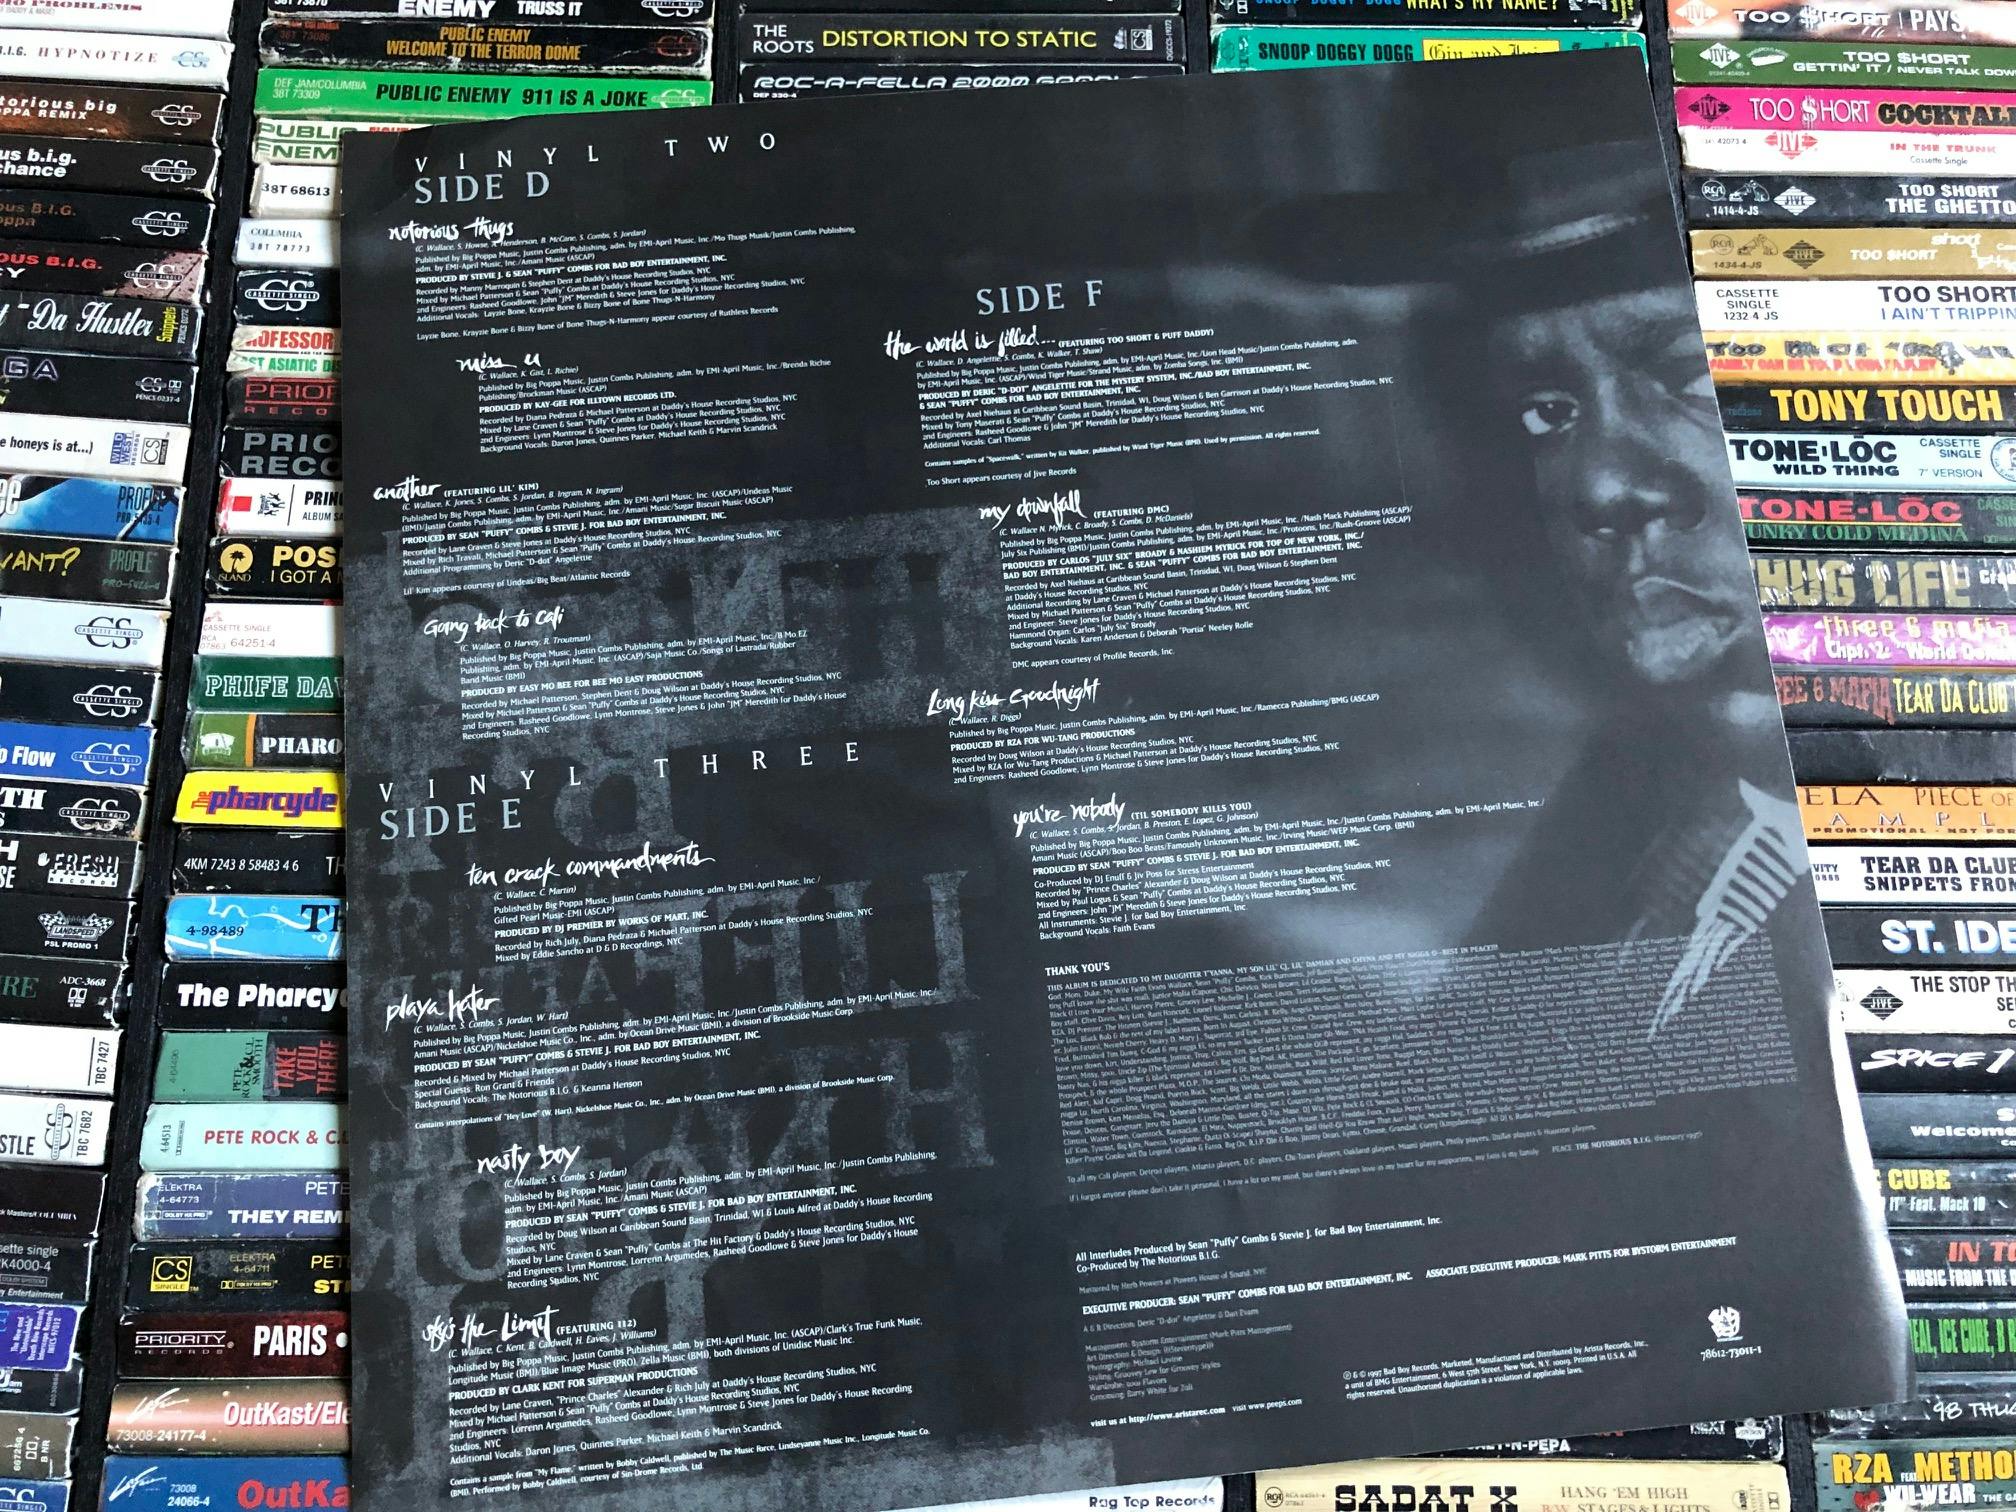 The Back Vinyl cover of The Notorious B.I.G.' 'Life After Death'